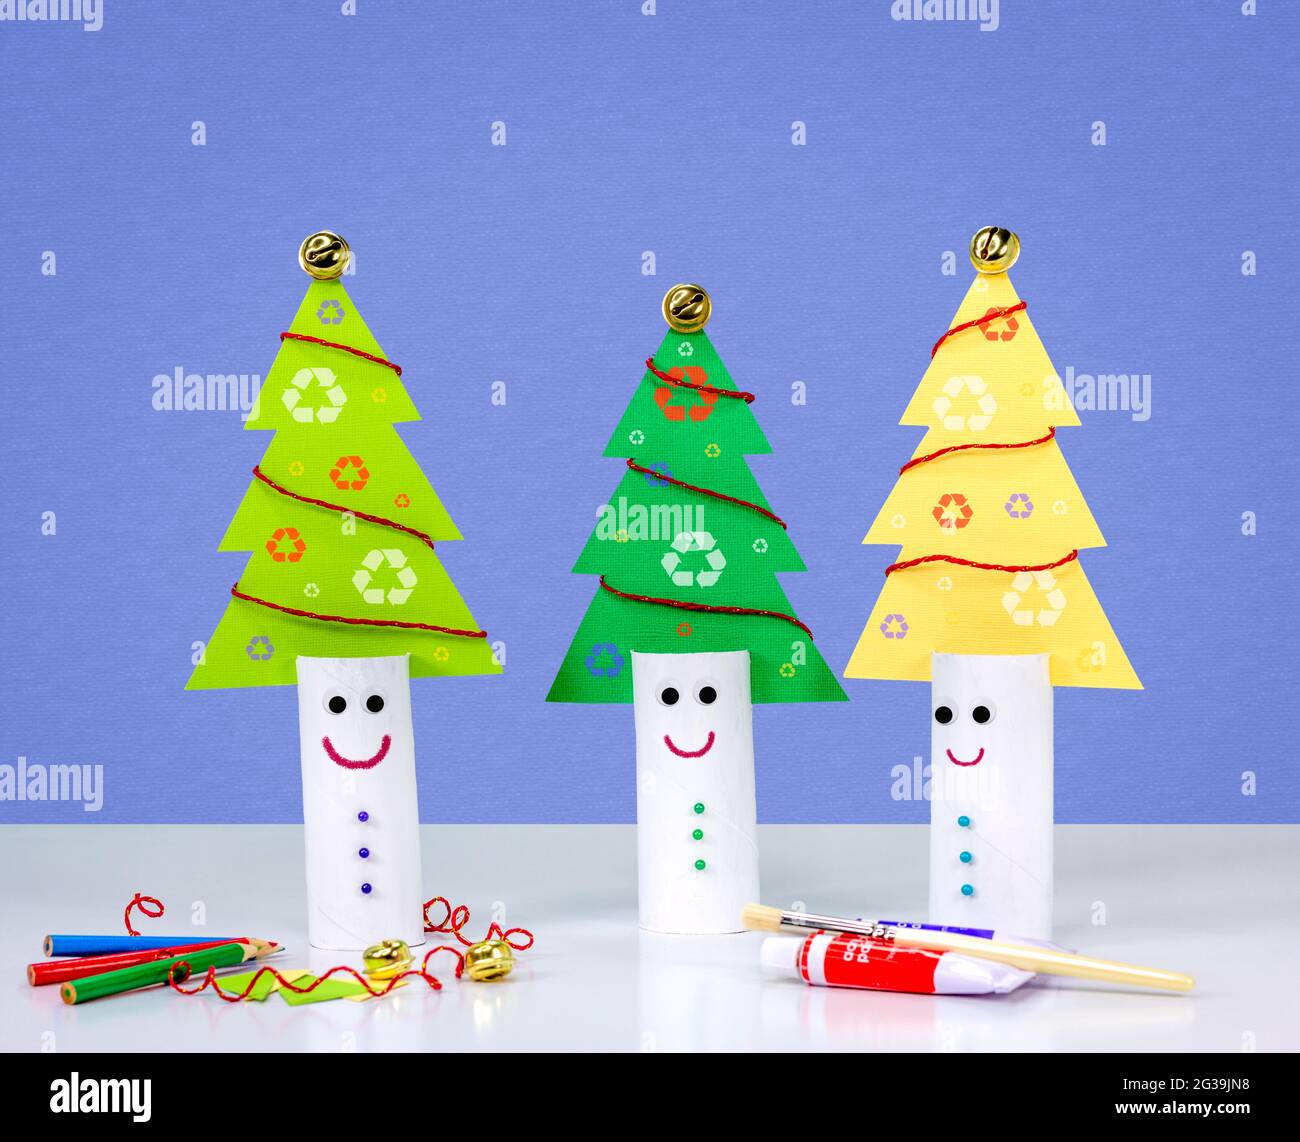 Recycle toilet roll tubes, decorated and reused to make fun Christmas tree decoration with smiling face, homemade quirky craft fun. Stock Photo